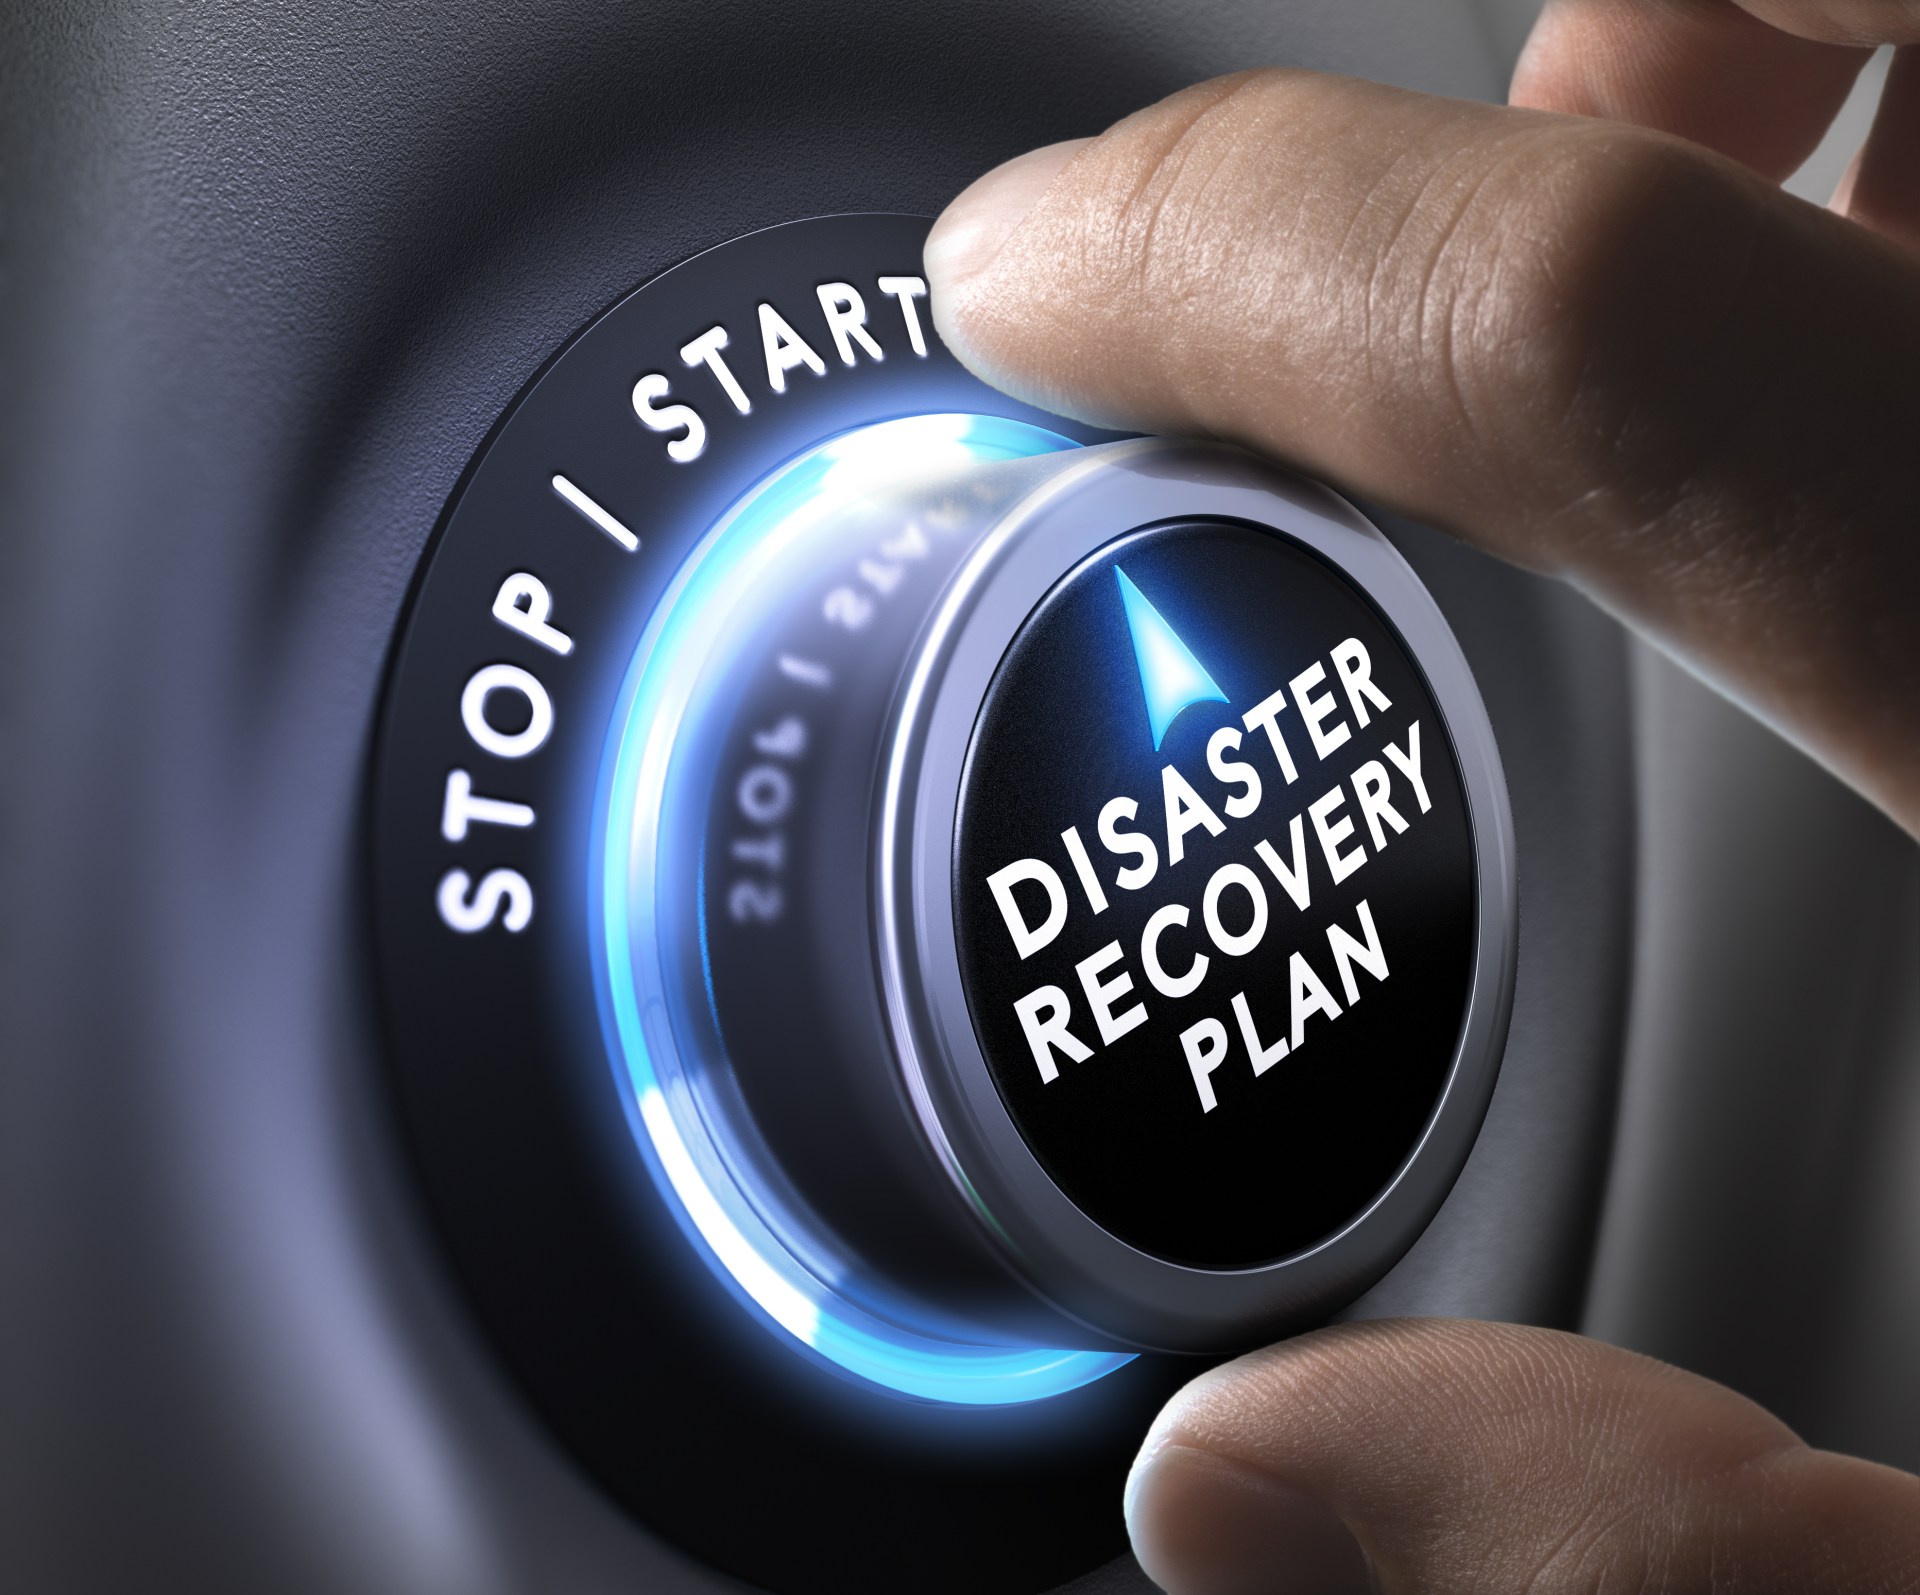 What You Need To Know To Choose An IT Disaster Recovery Solution